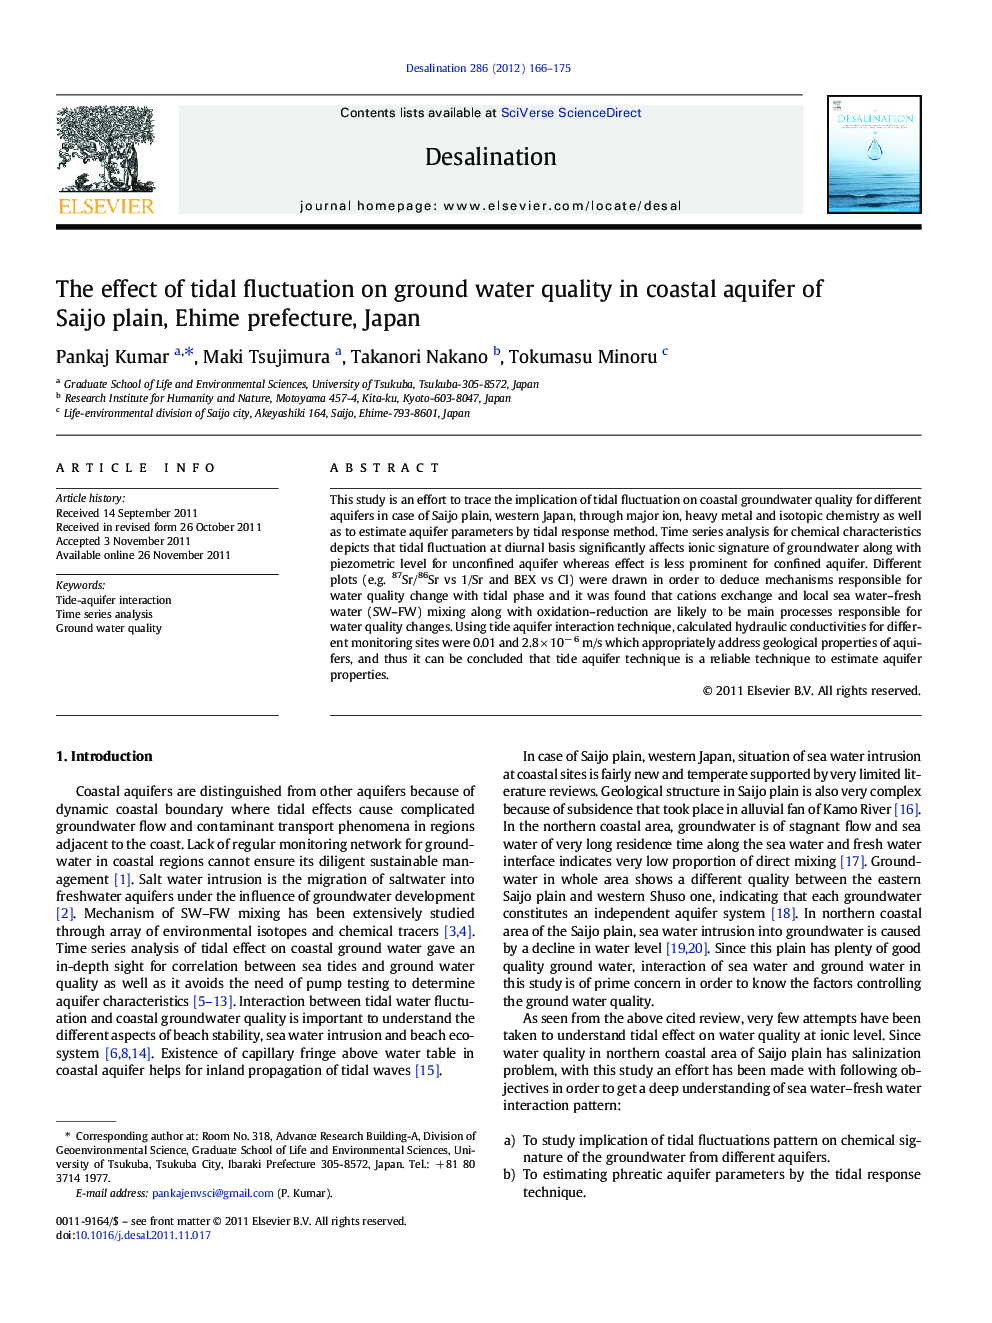 The effect of tidal fluctuation on ground water quality in coastal aquifer of Saijo plain, Ehime prefecture, Japan